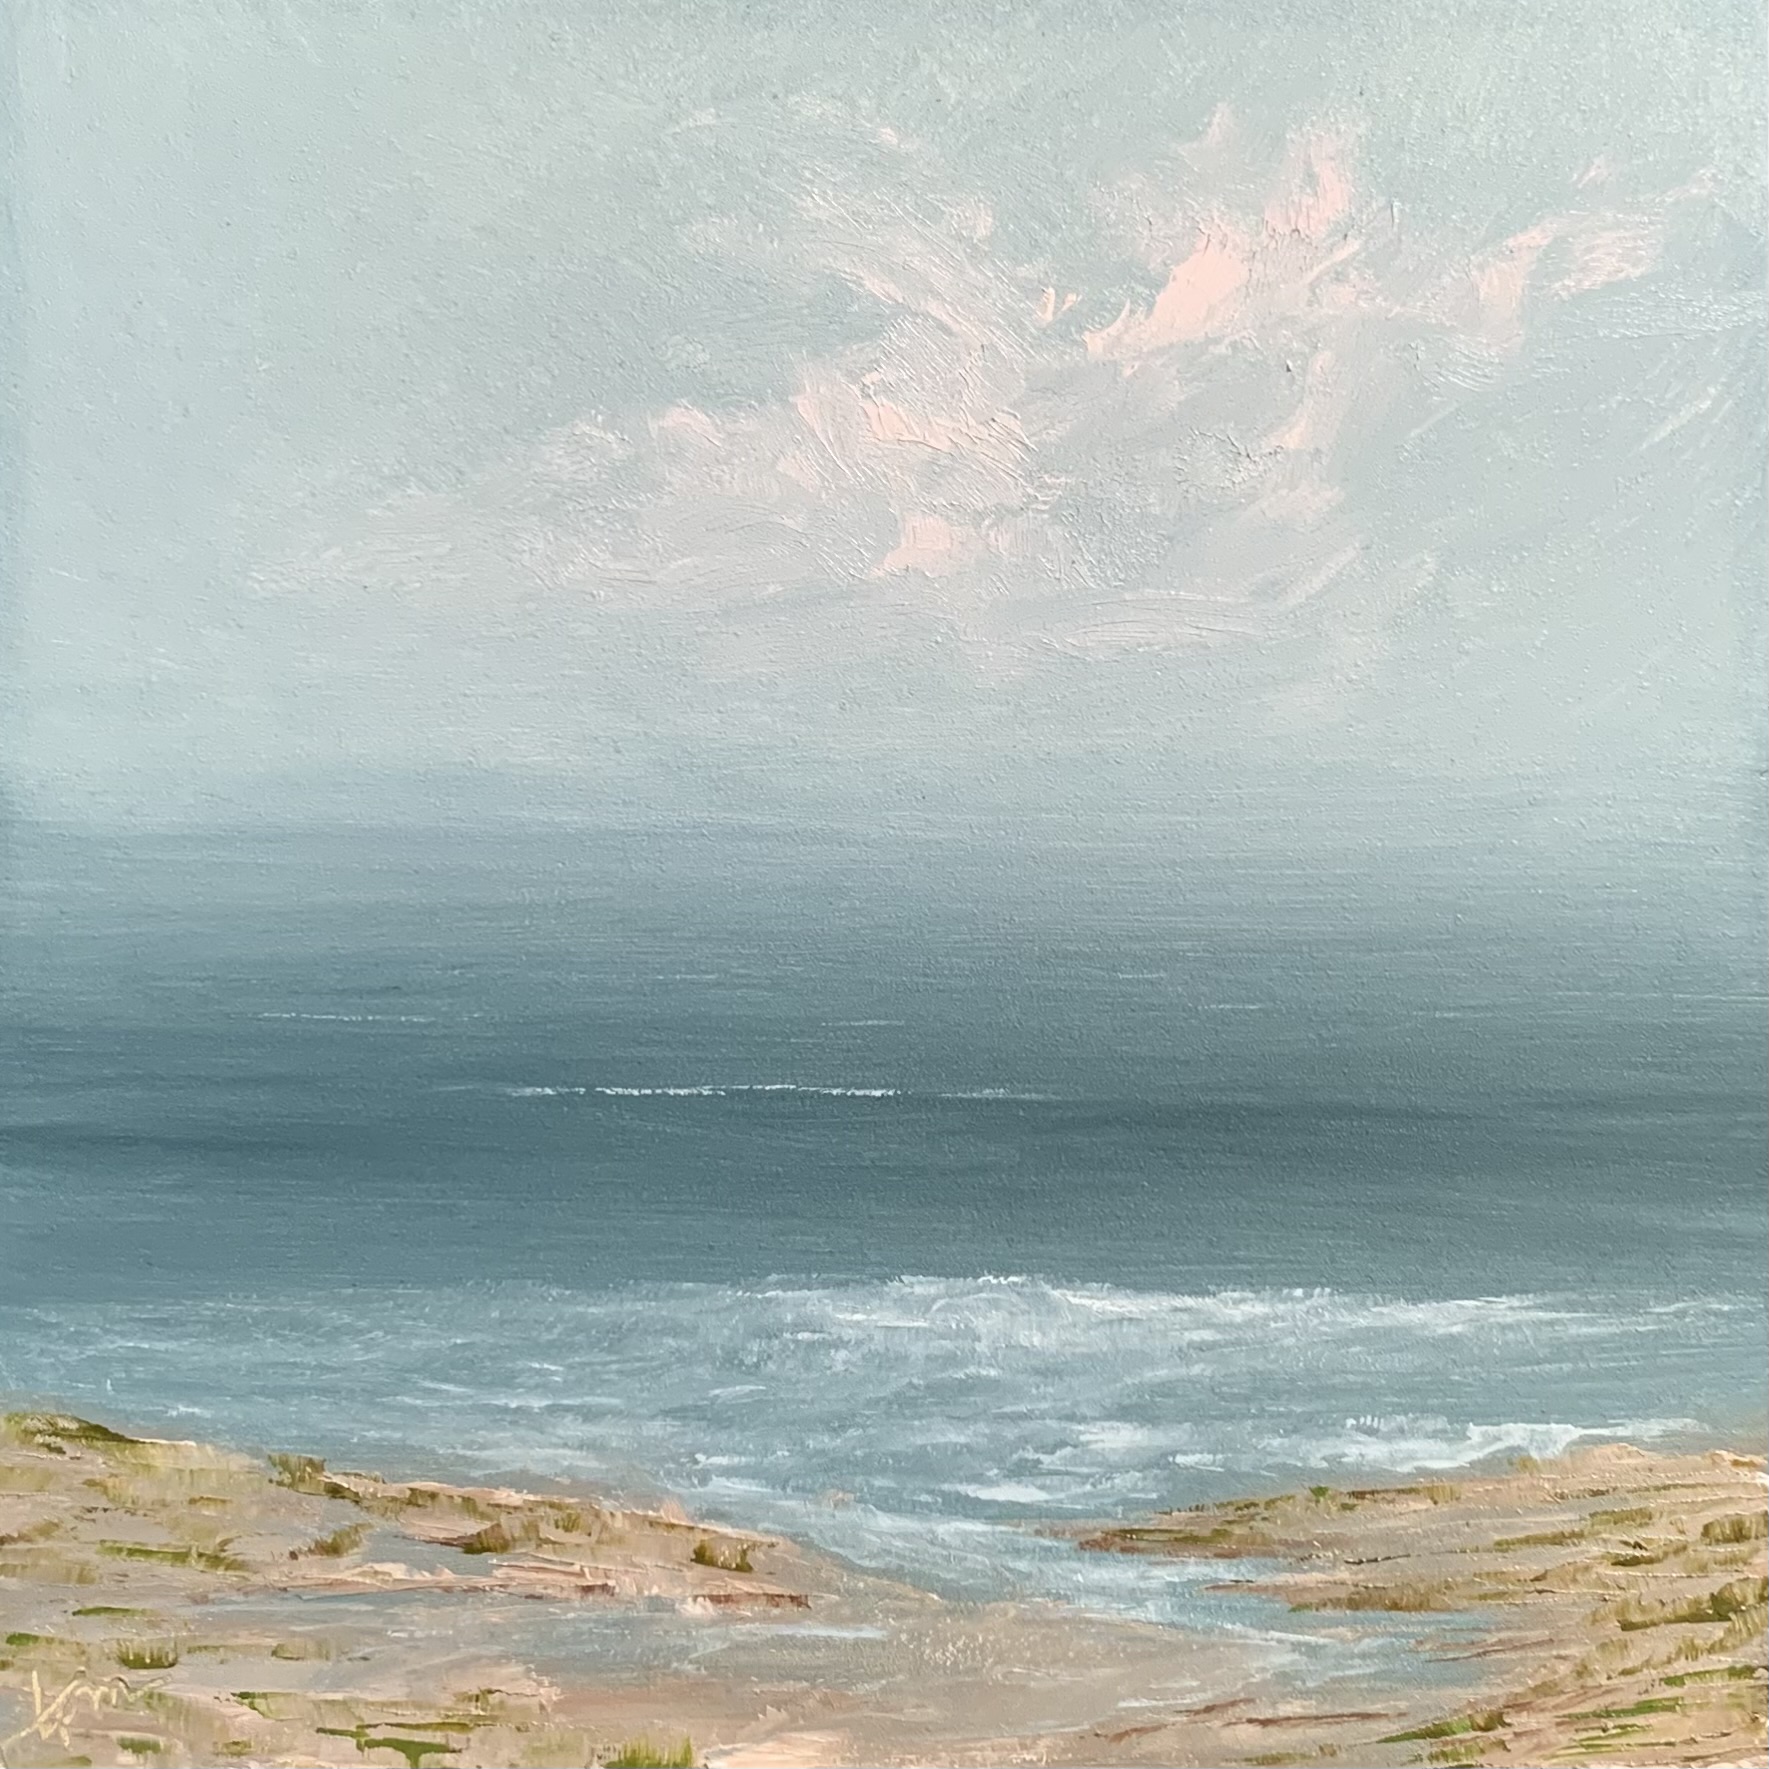 Photo of an original seascape painting by Tisha Mark, “Little Seaside Visits No. 3” 6”x6” oil on Gessobord (2023). This seascape features a soft springtime color palette with soft pink clouds in a blue sky over peaceful ocean. The shore features bits of sea grass just greening up.